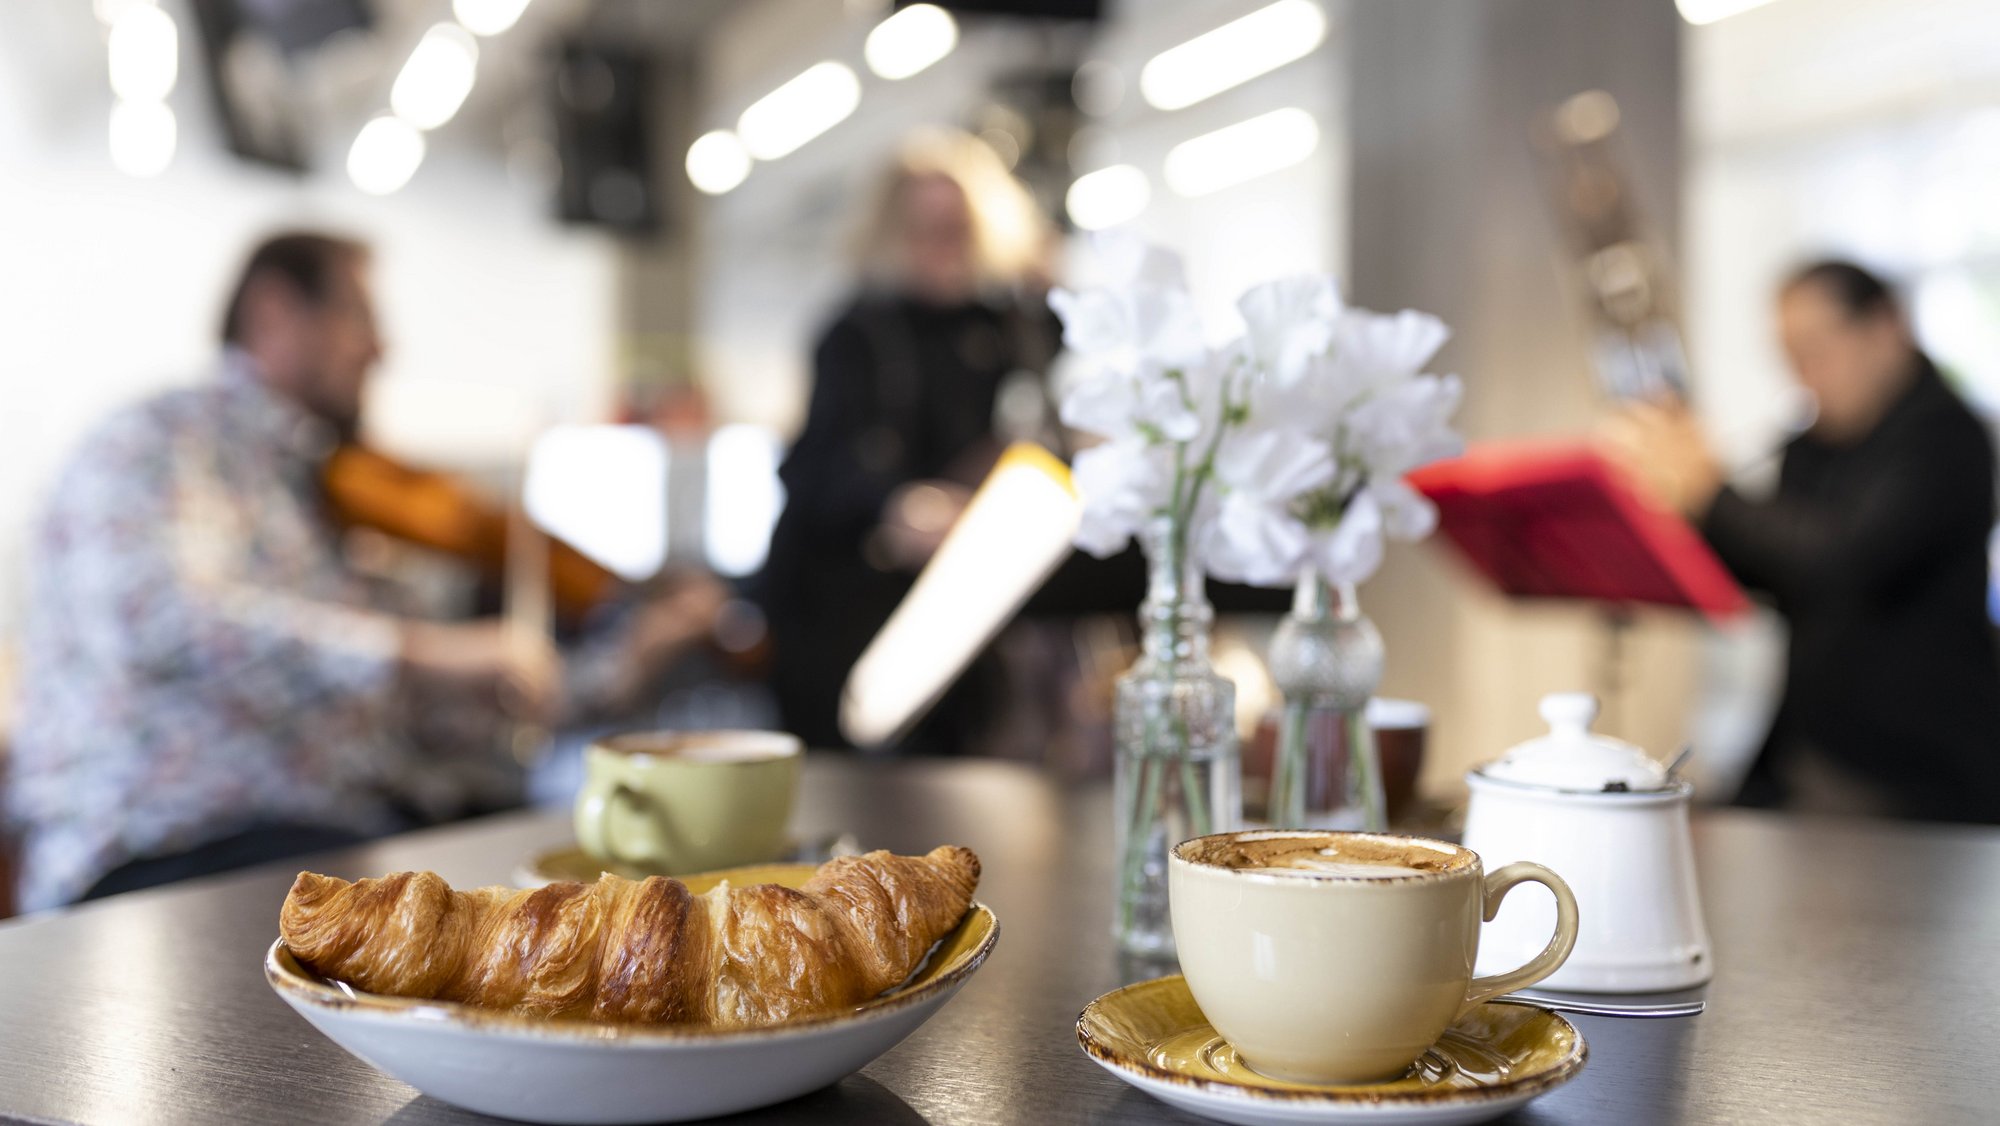 Croissant and coffee on a table, musicians play in the background